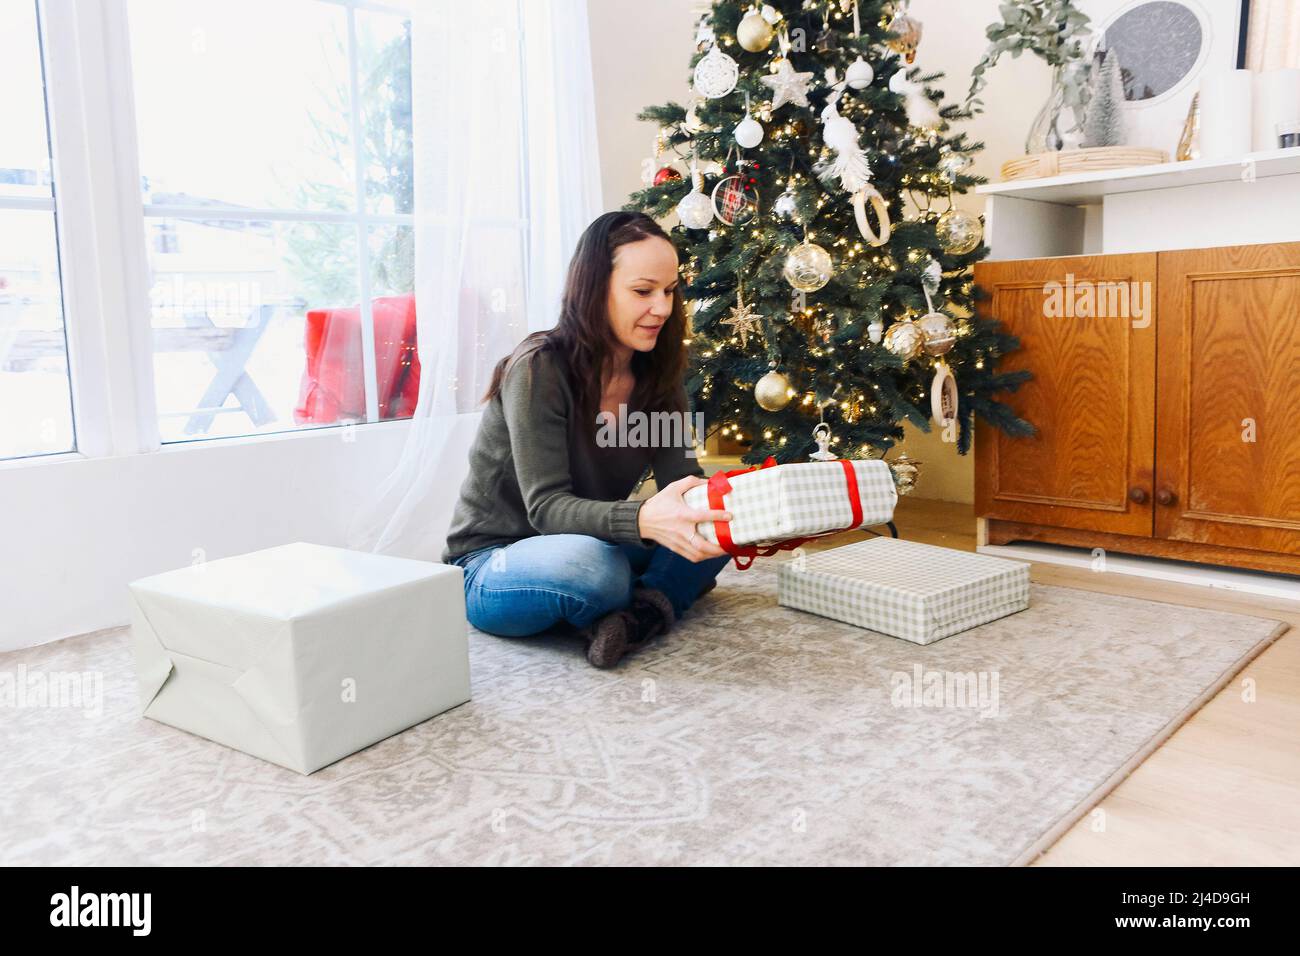 Happy young caucasian woman packing presents at home under decorated christmas tree. Smiling girl in a knitted sweater celebrating the new year. Happy Stock Photo